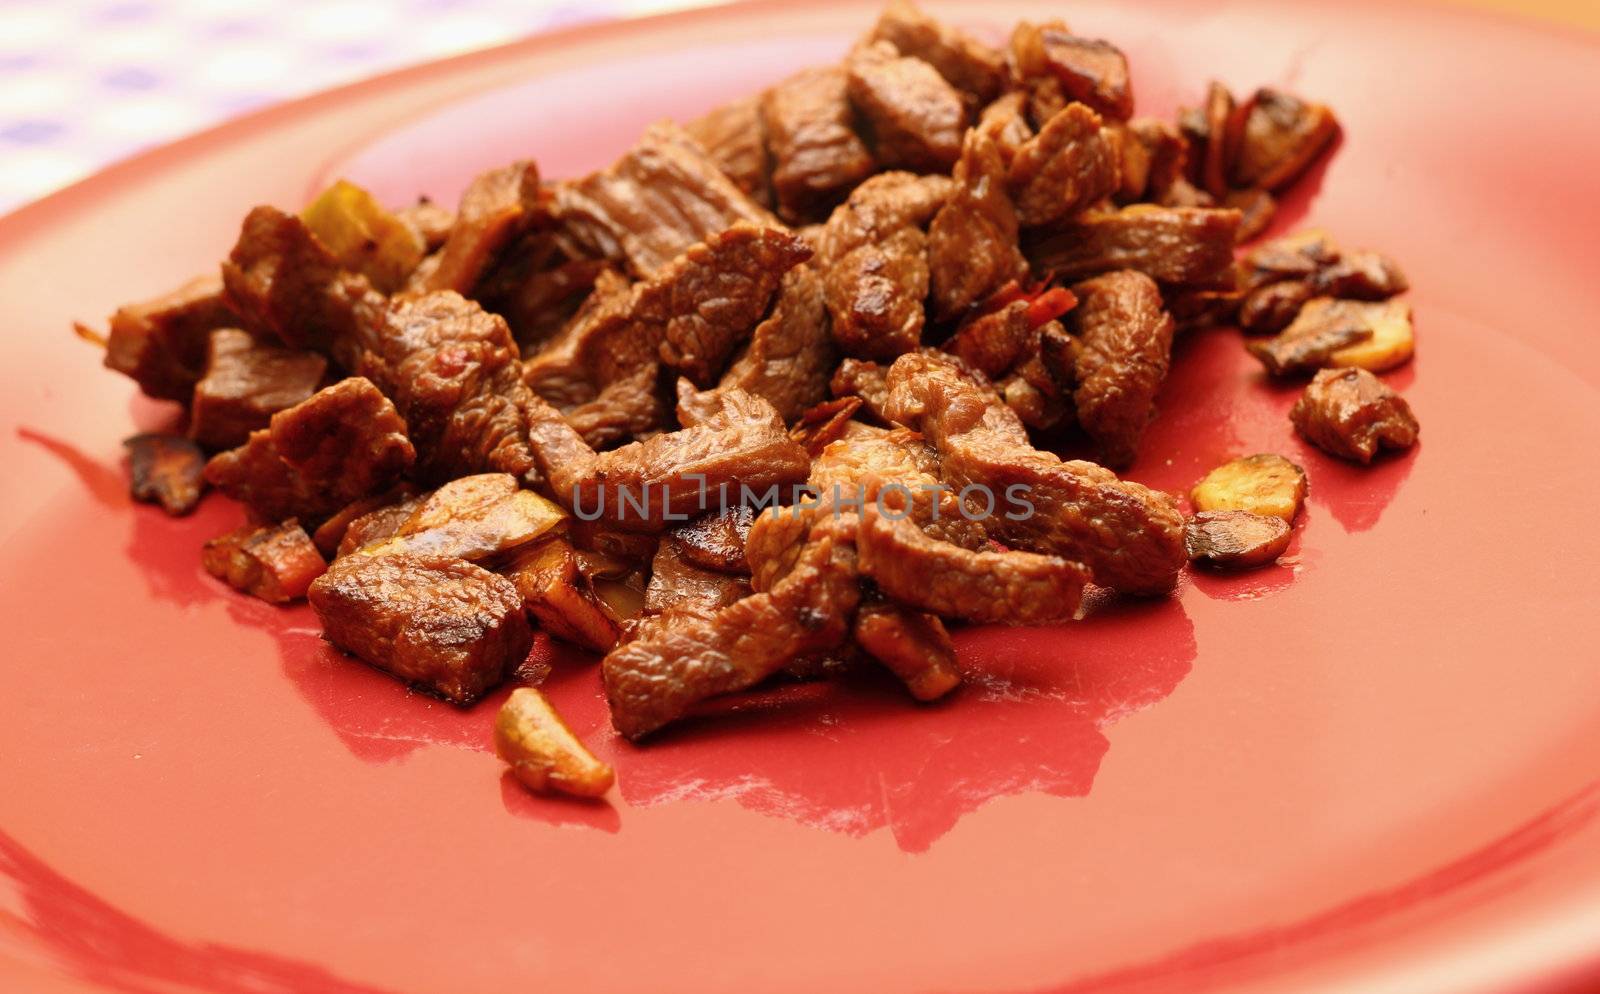 fried beef slices by taviphoto